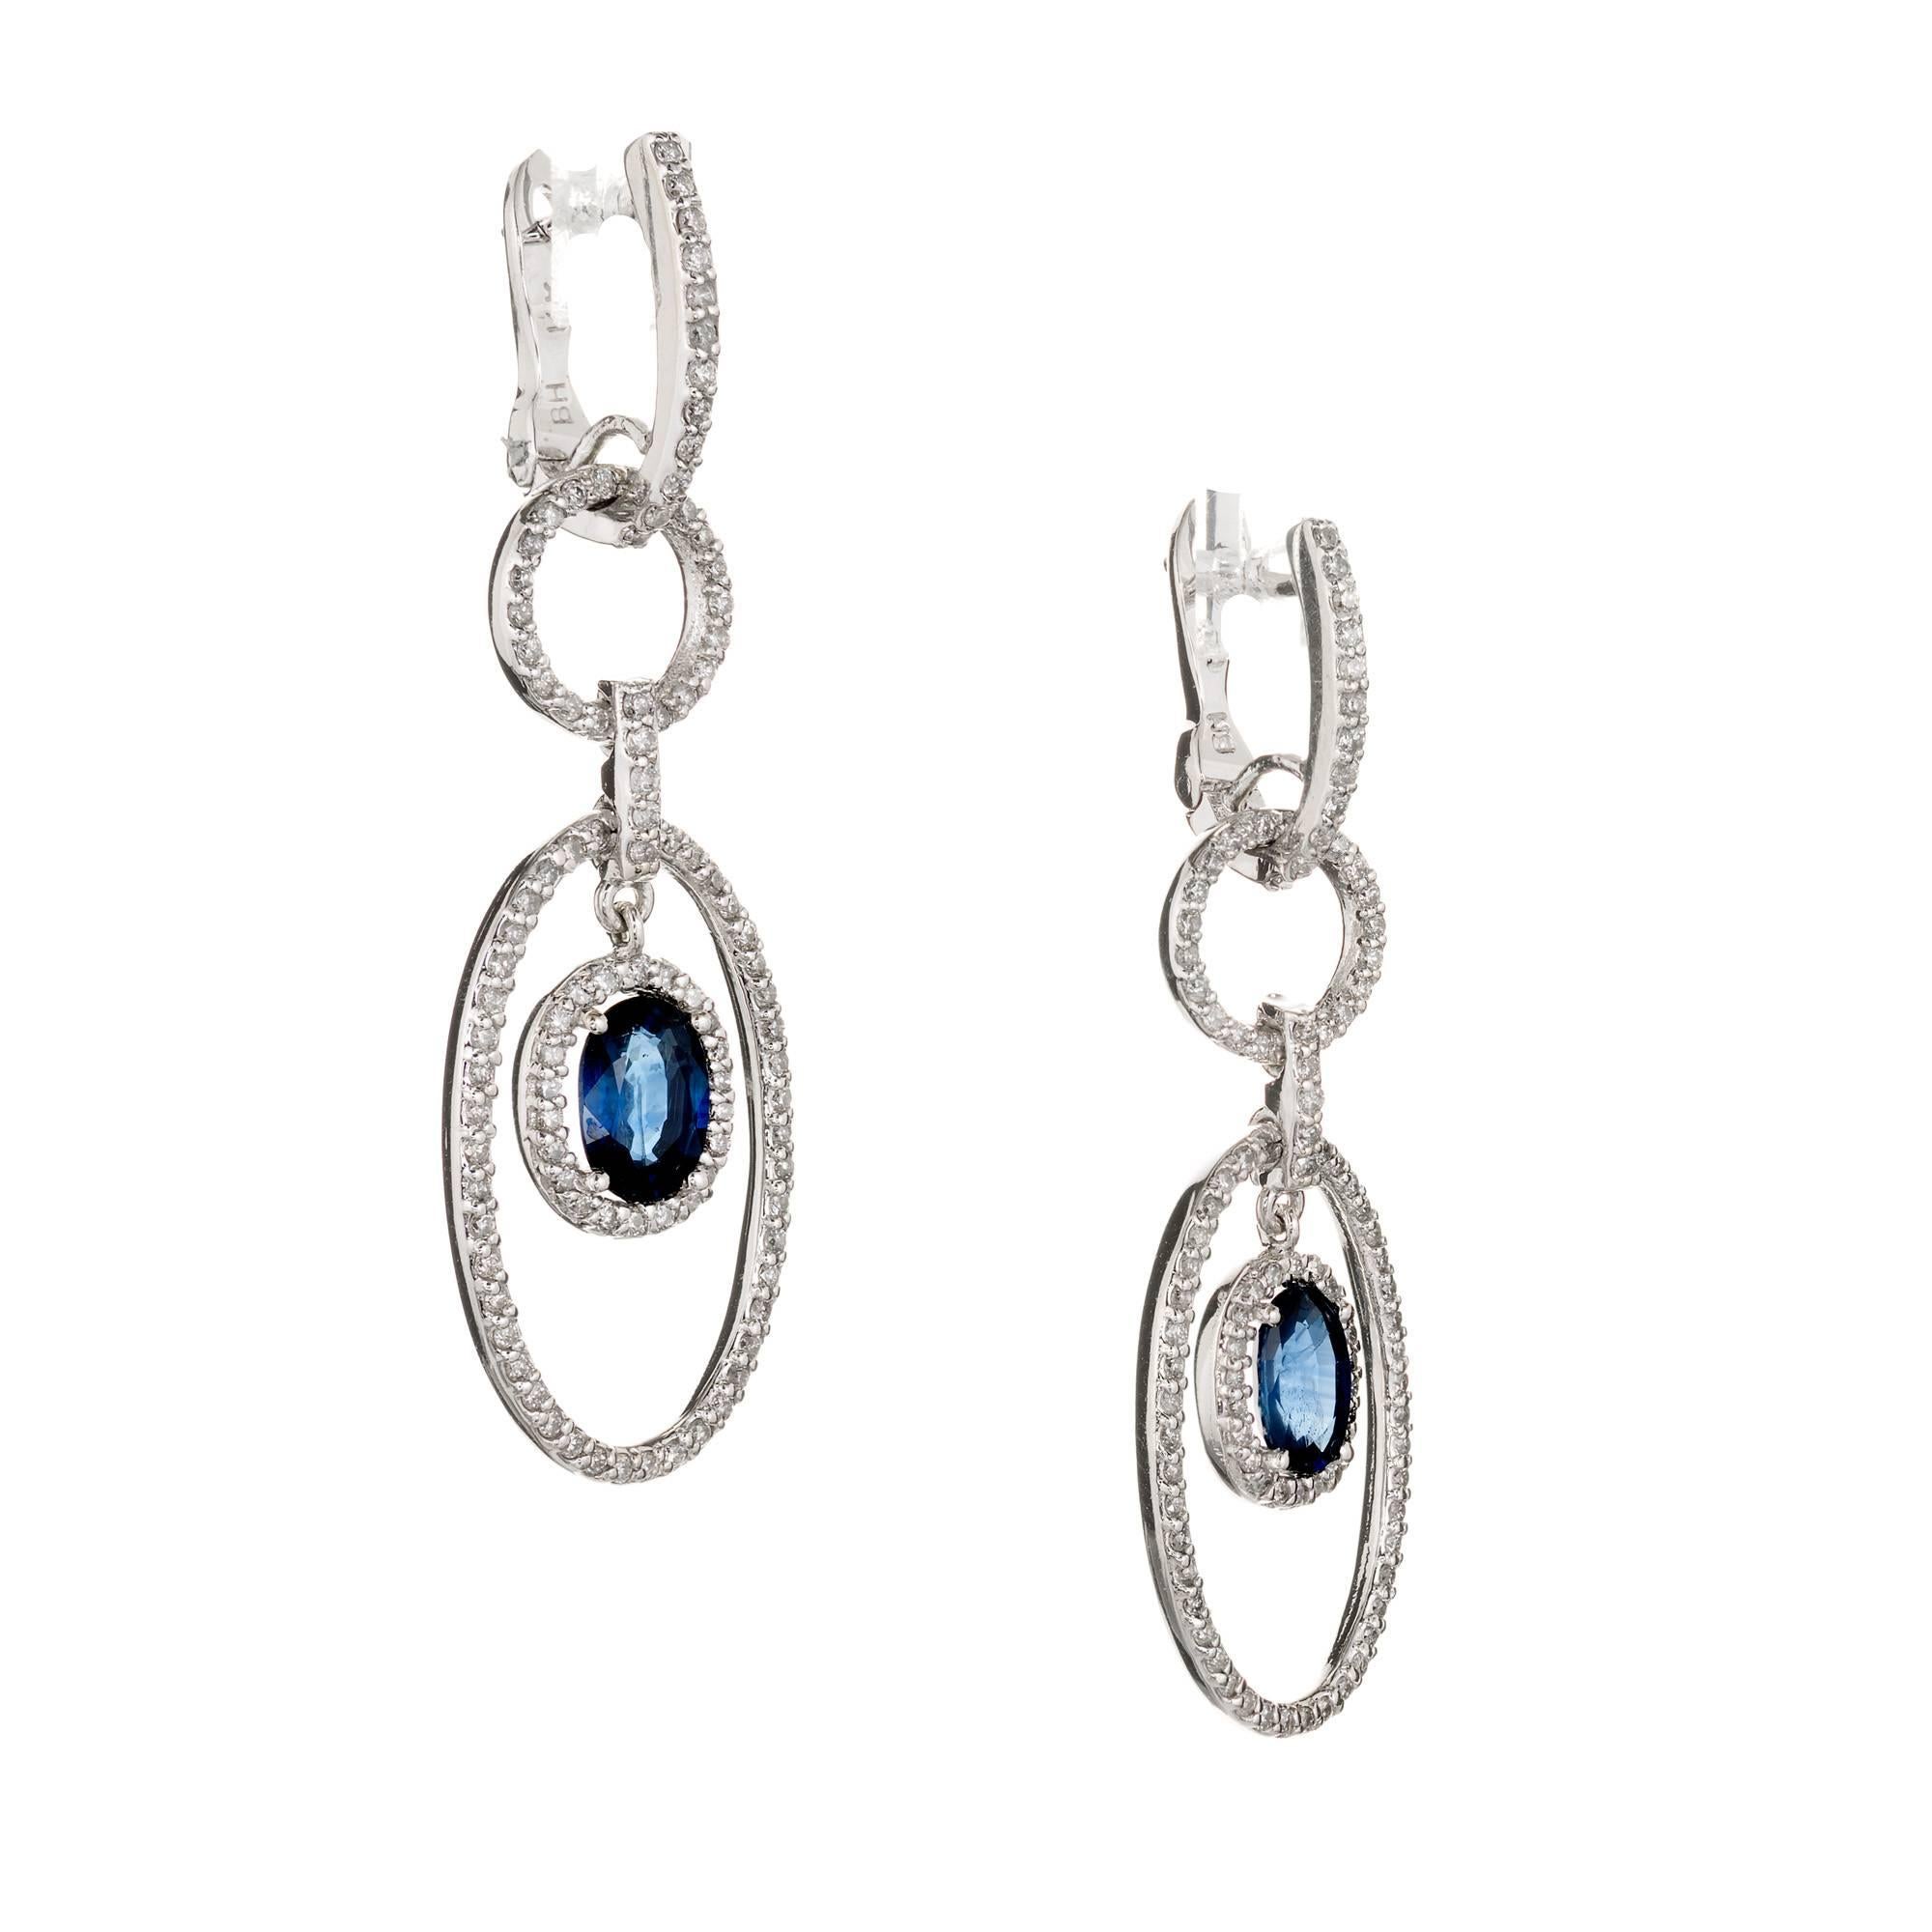 Micro common prong set. 5 section beautiful and delicate 14k white gold dangle earrings. They are set throughout with full cut white sparkly diamonds. Very little metal shows, just the diamonds. The center sections are set with a beautiful oval well